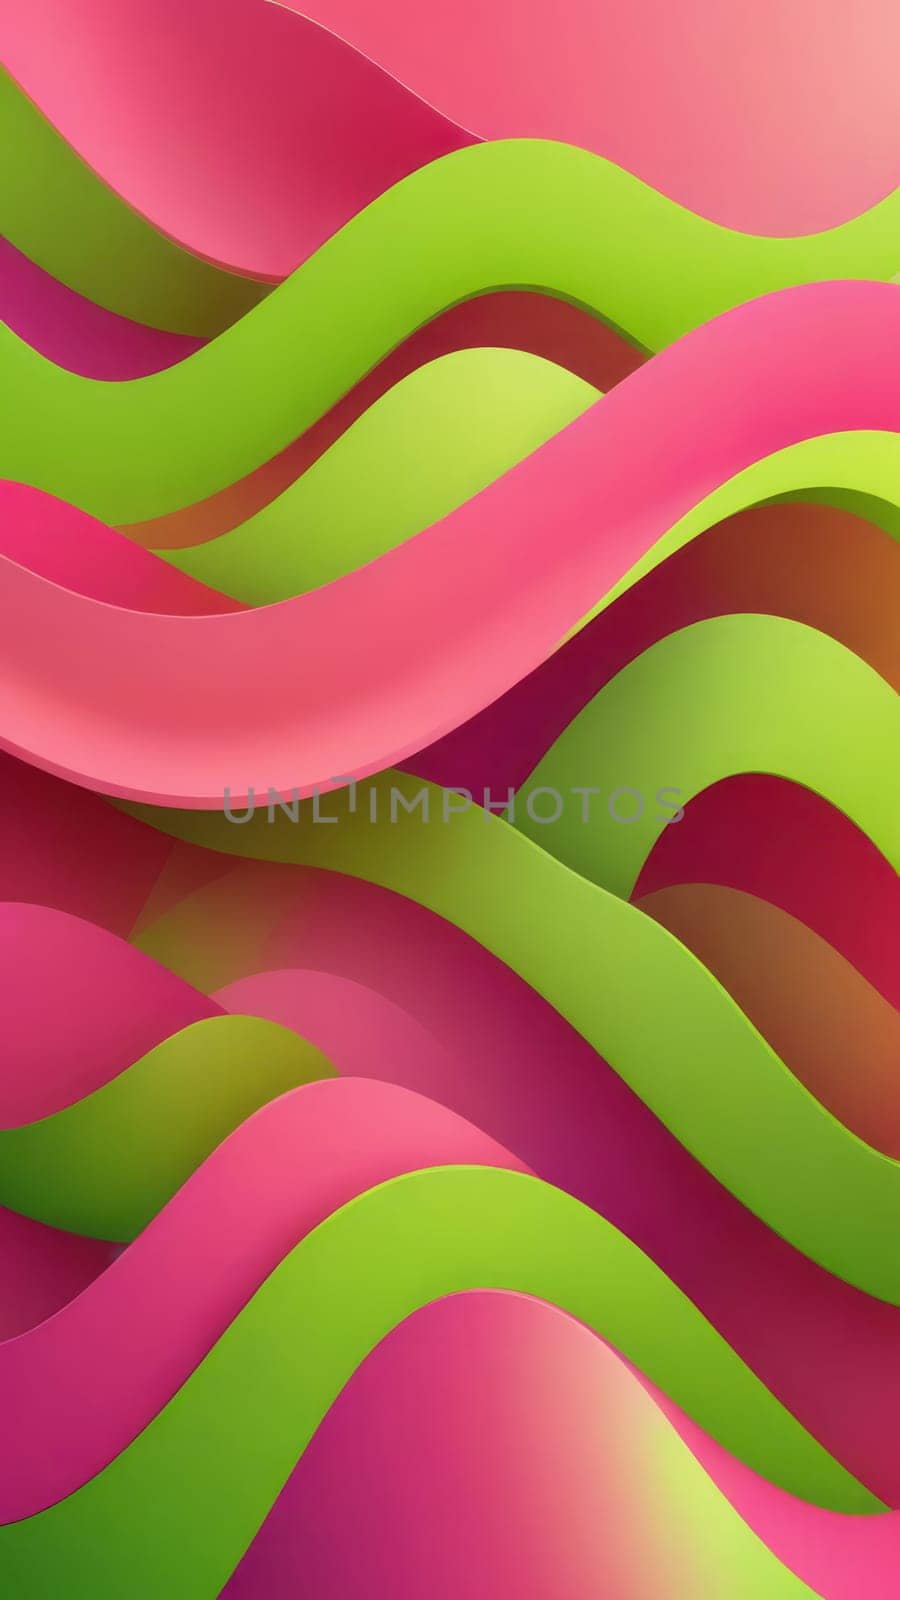 Colorful art from Meander shapes and lime by nkotlyar